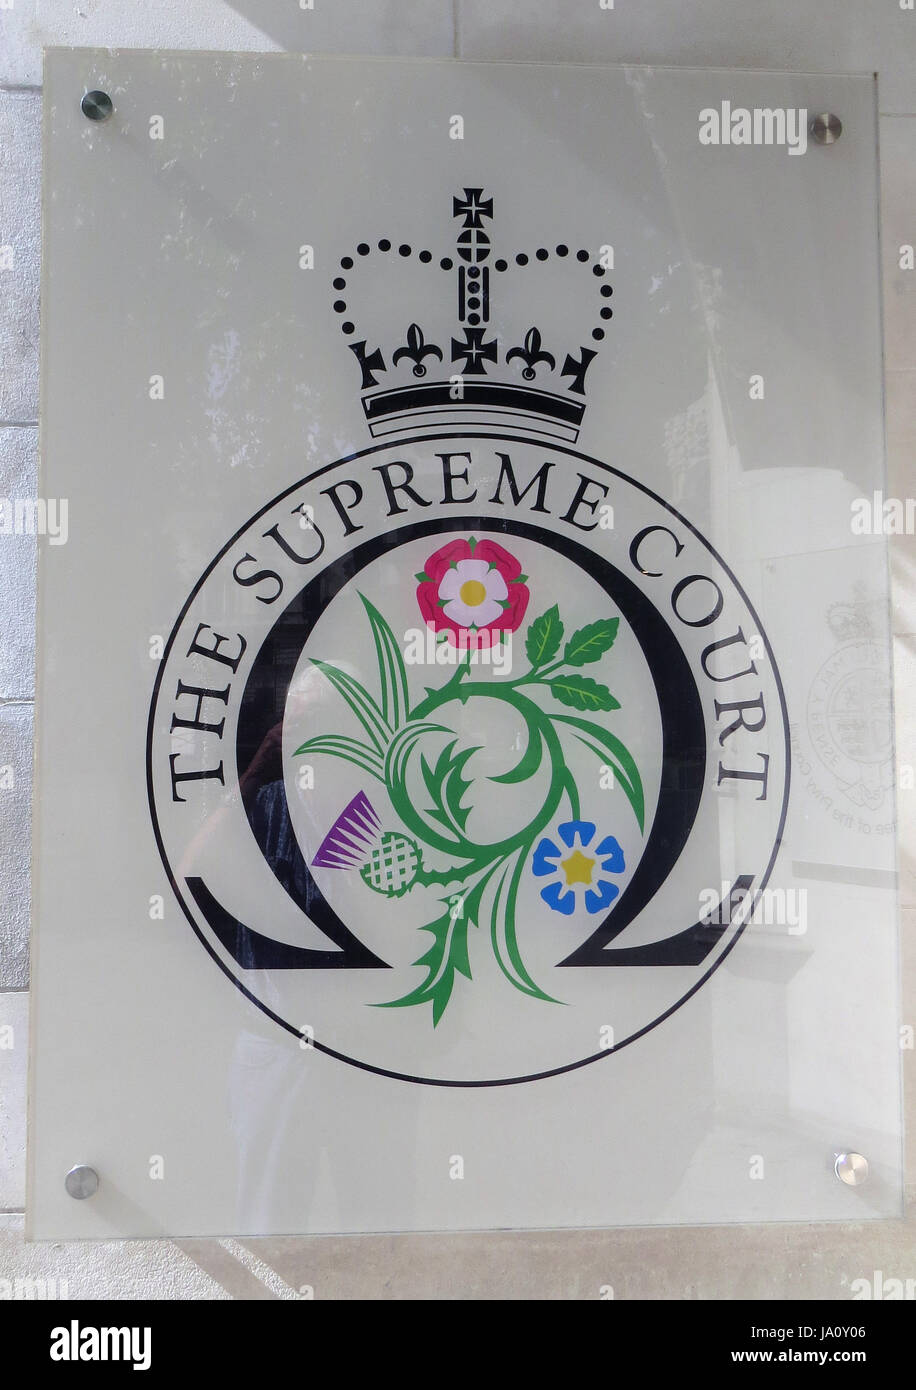 UK SUPEME COURT logo at offices entrance in Little George Street, Parliament Square, London. Photo: Tony Gale Stock Photo